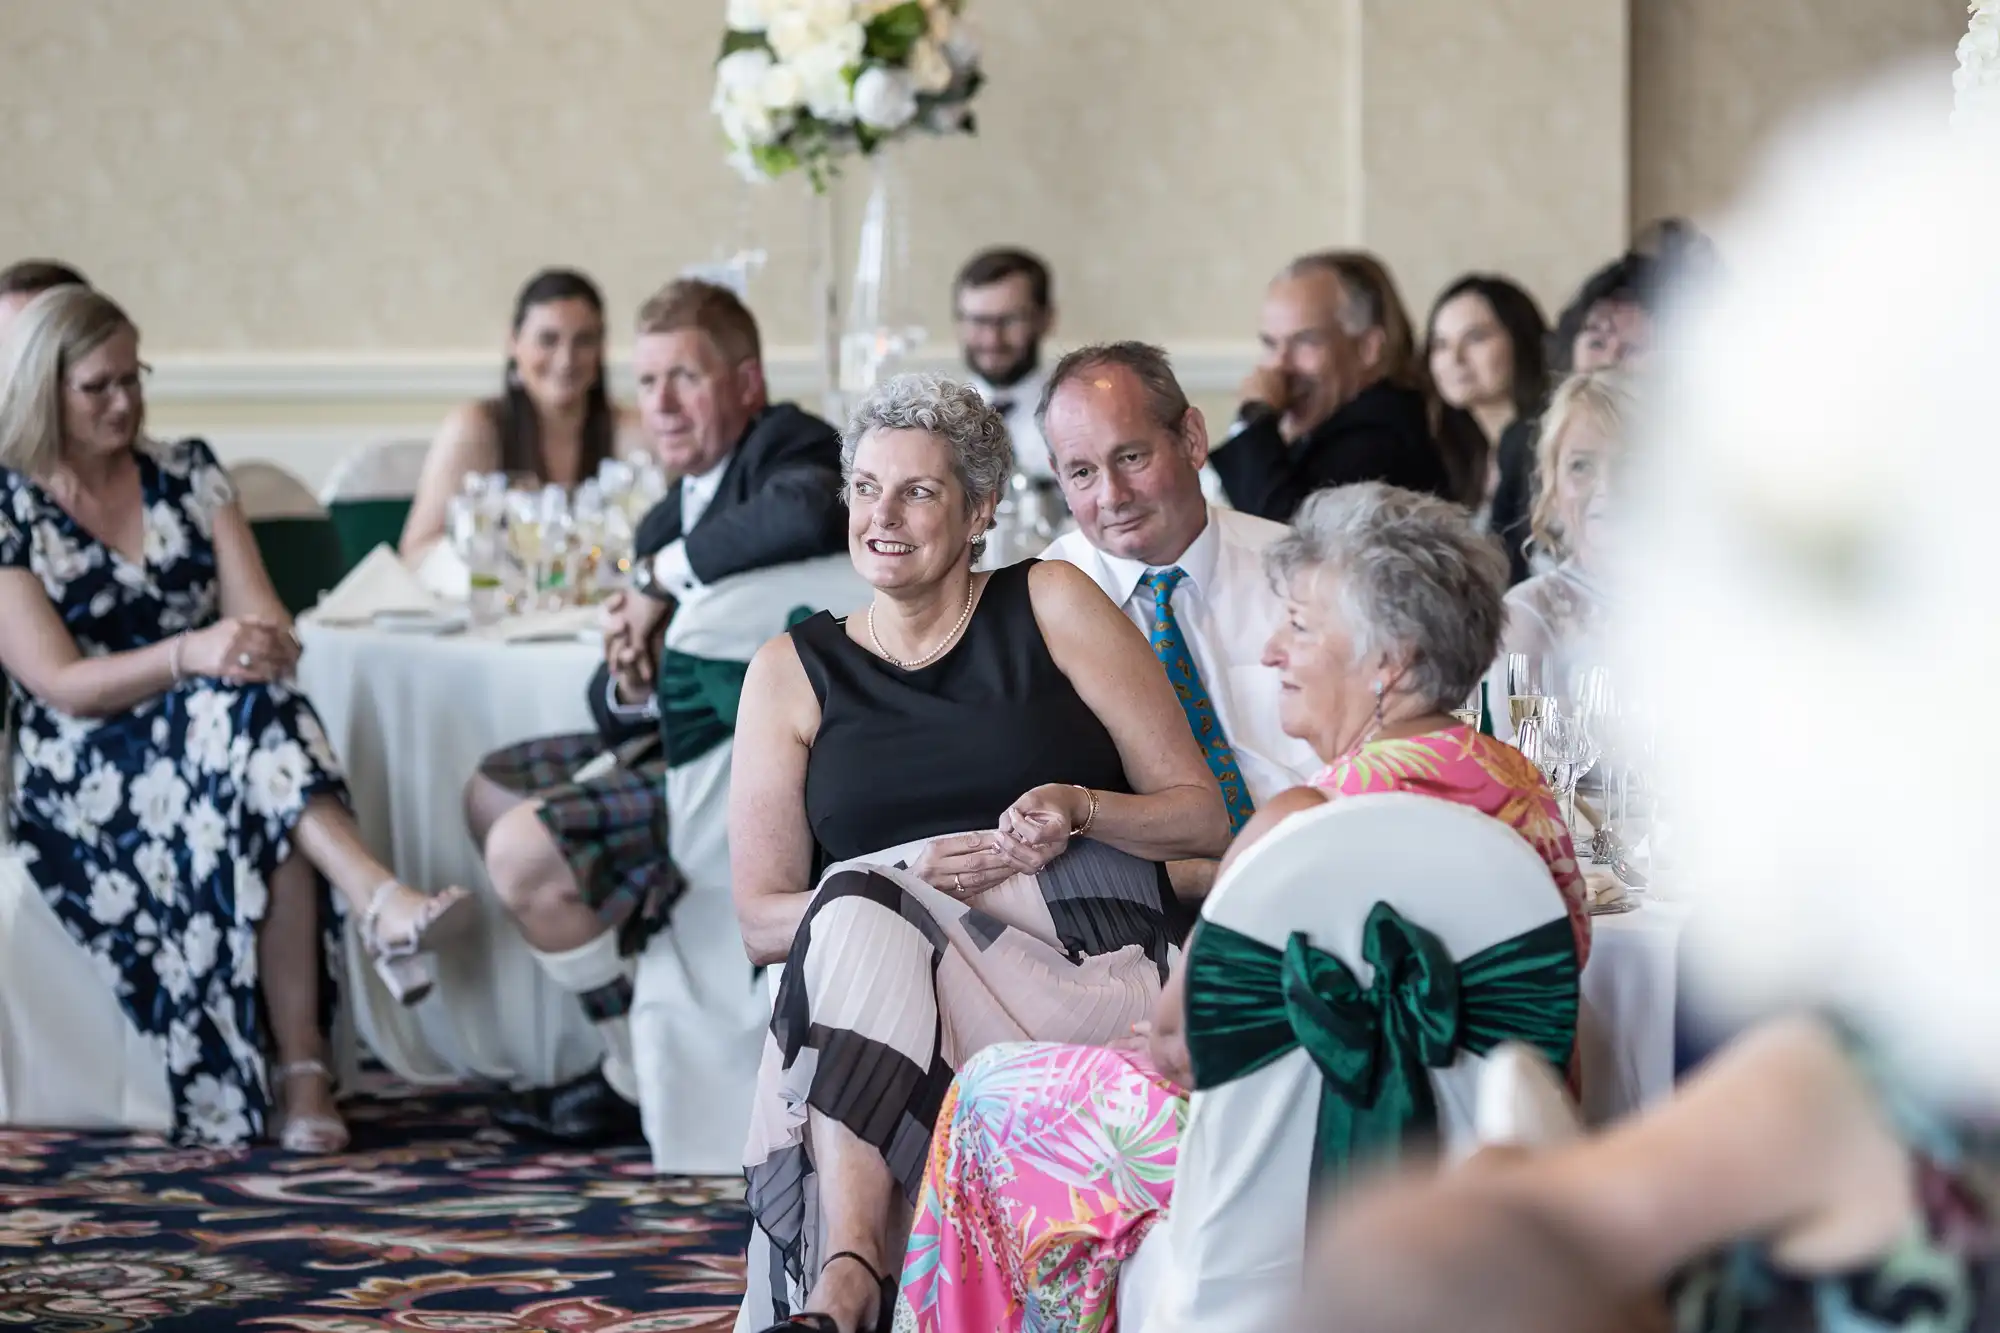 A group of elegantly dressed guests seated at a wedding reception, focused on an event happening out of frame, with a joyful expression on some faces.